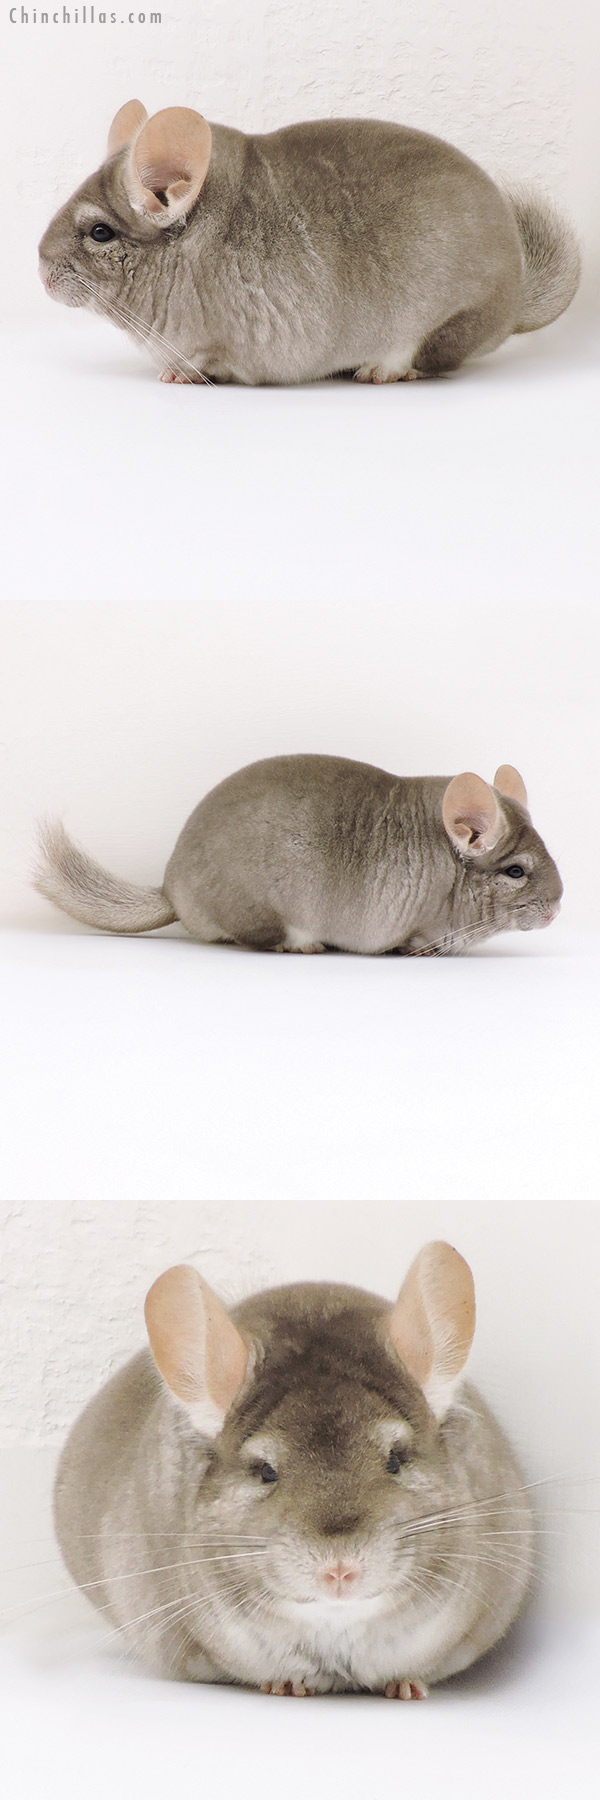 Chinchilla or related item offered for sale or export on Chinchillas.com - 17193 Large Blocky Premium Production Quality Beige Female Chinchilla